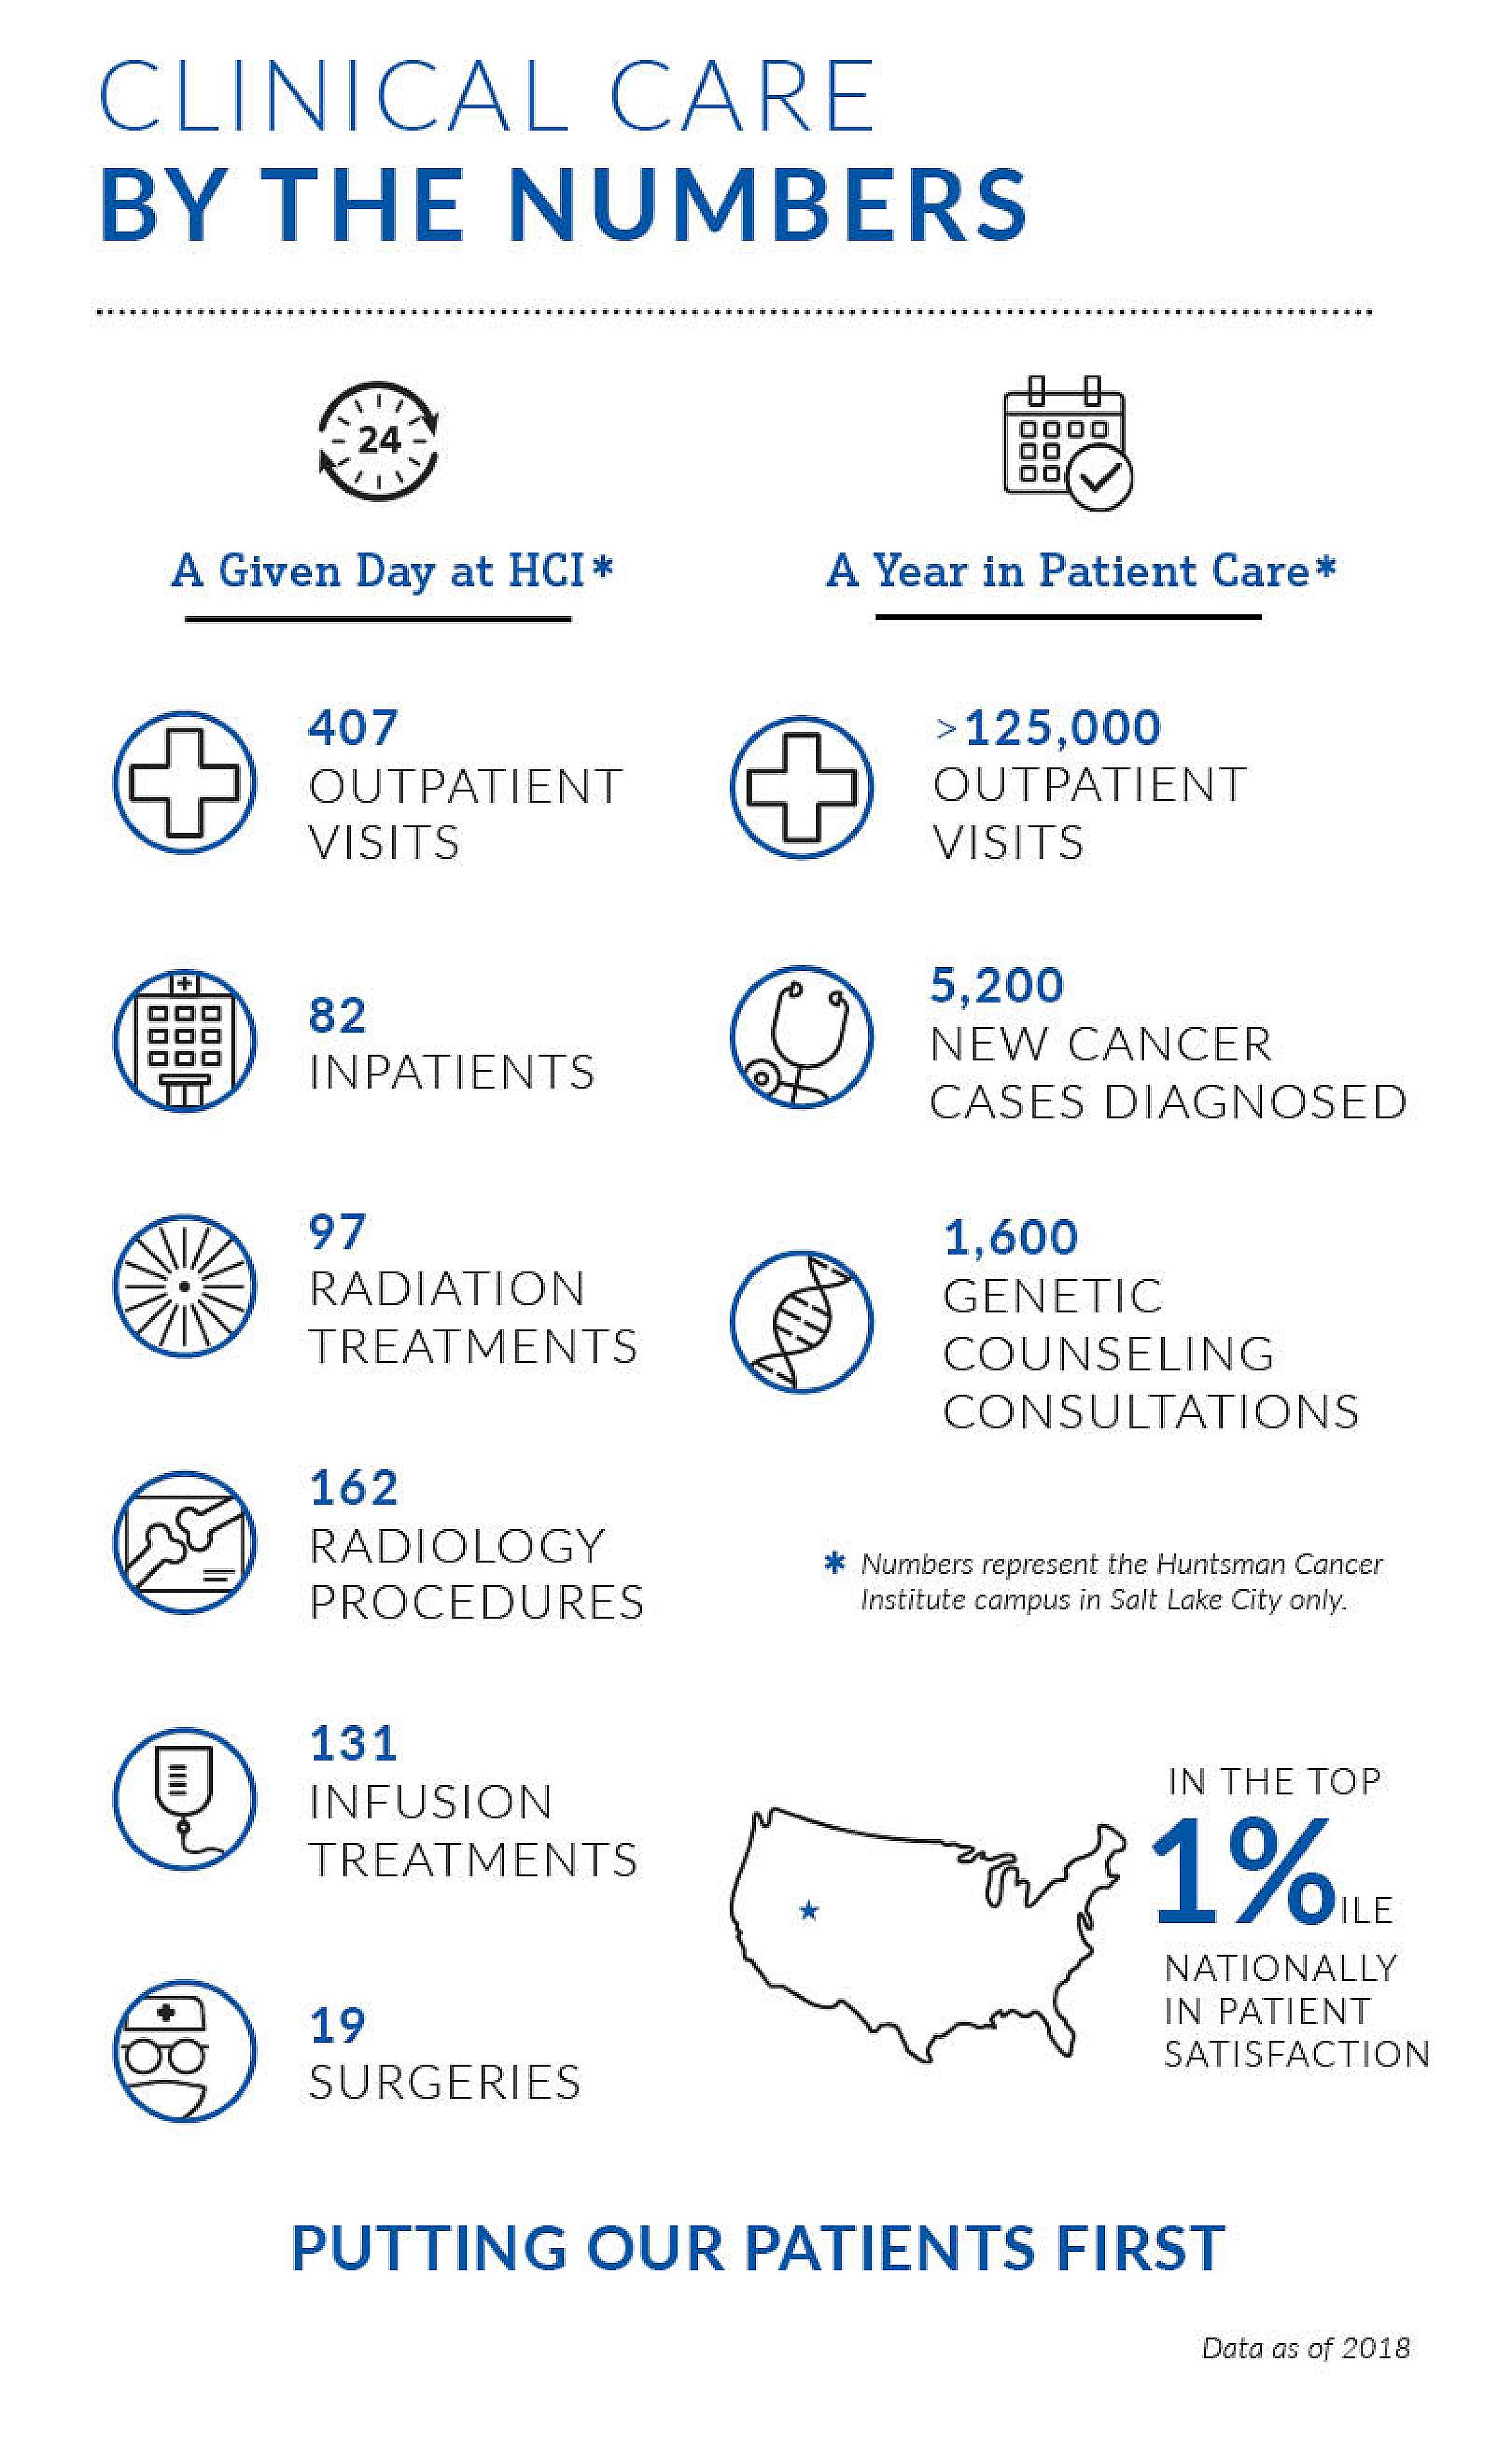 Clinical care by the numbers infographic